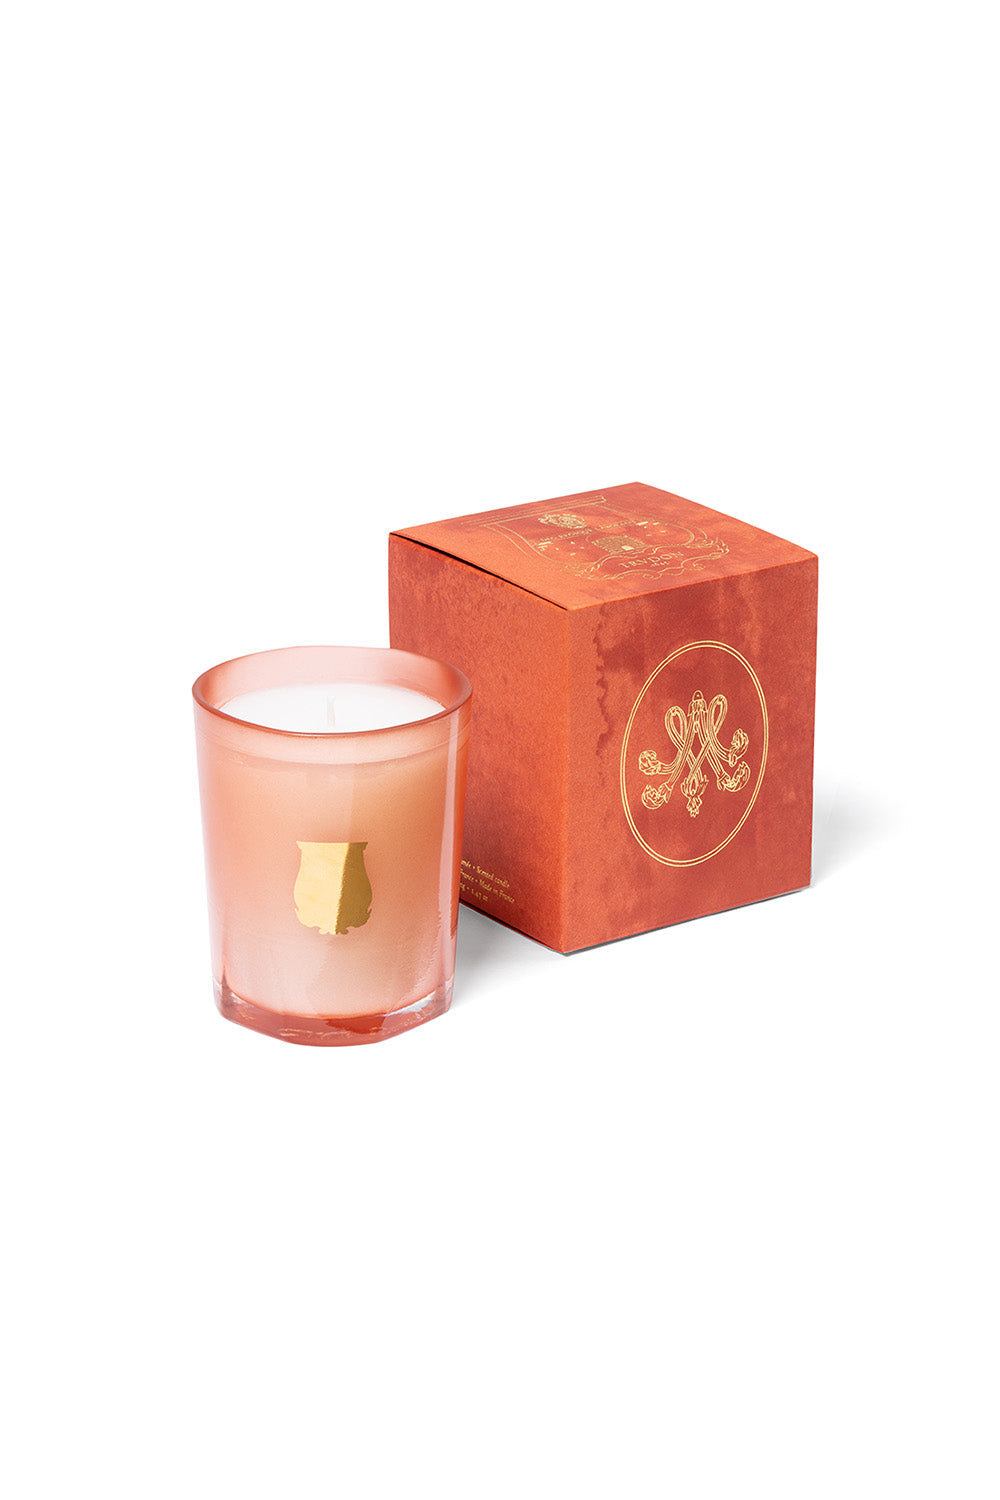 Tuileries Candle 70g